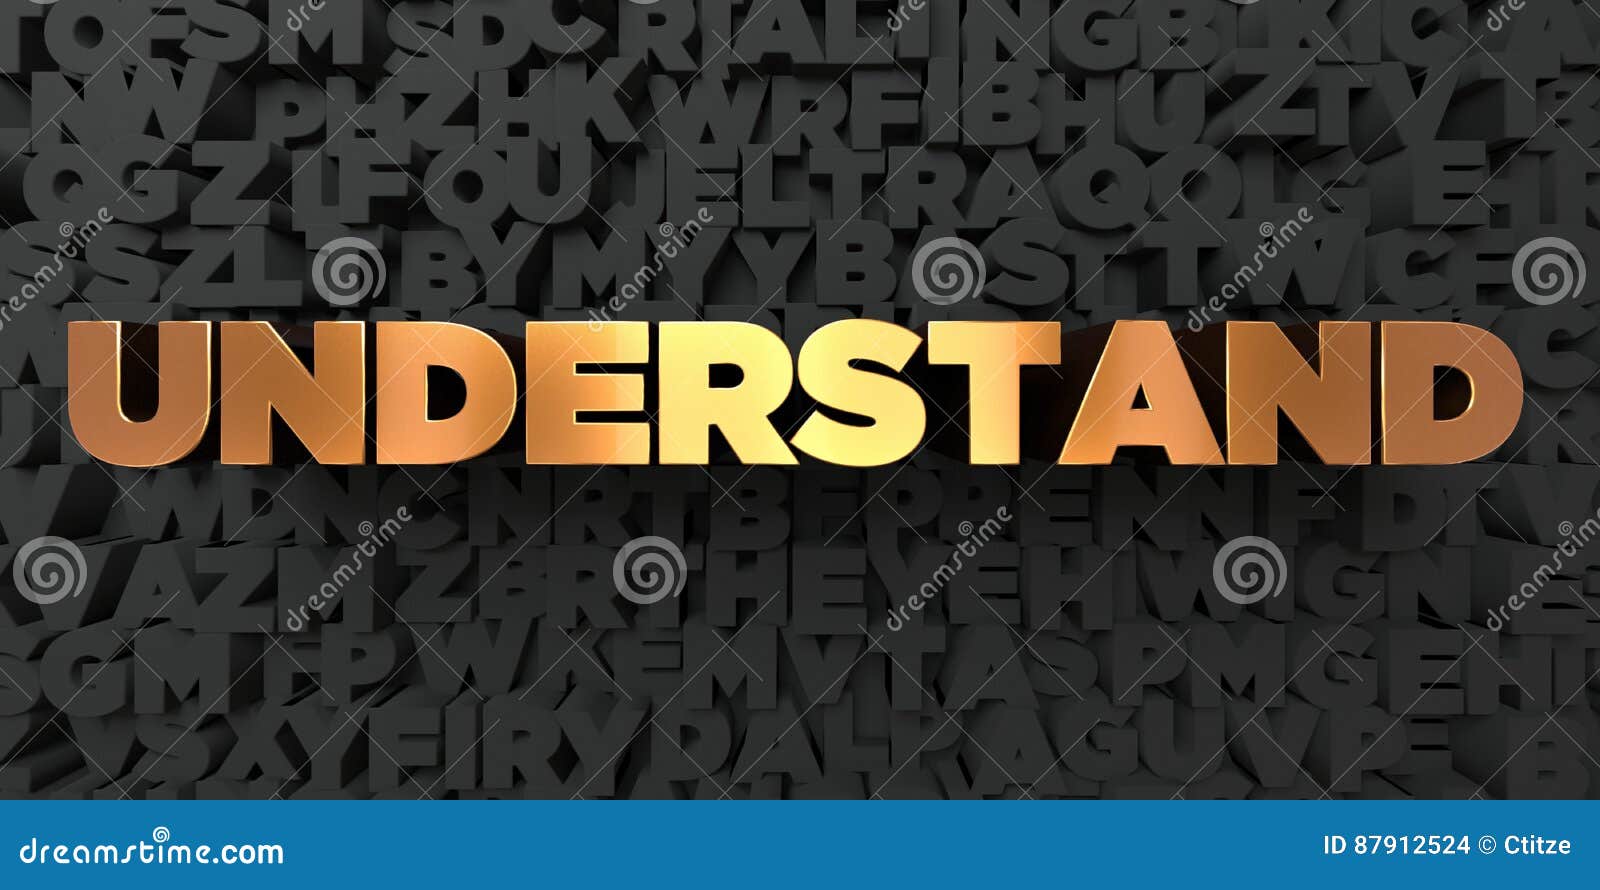 understand - gold text on black background - 3d rendered royalty free stock picture